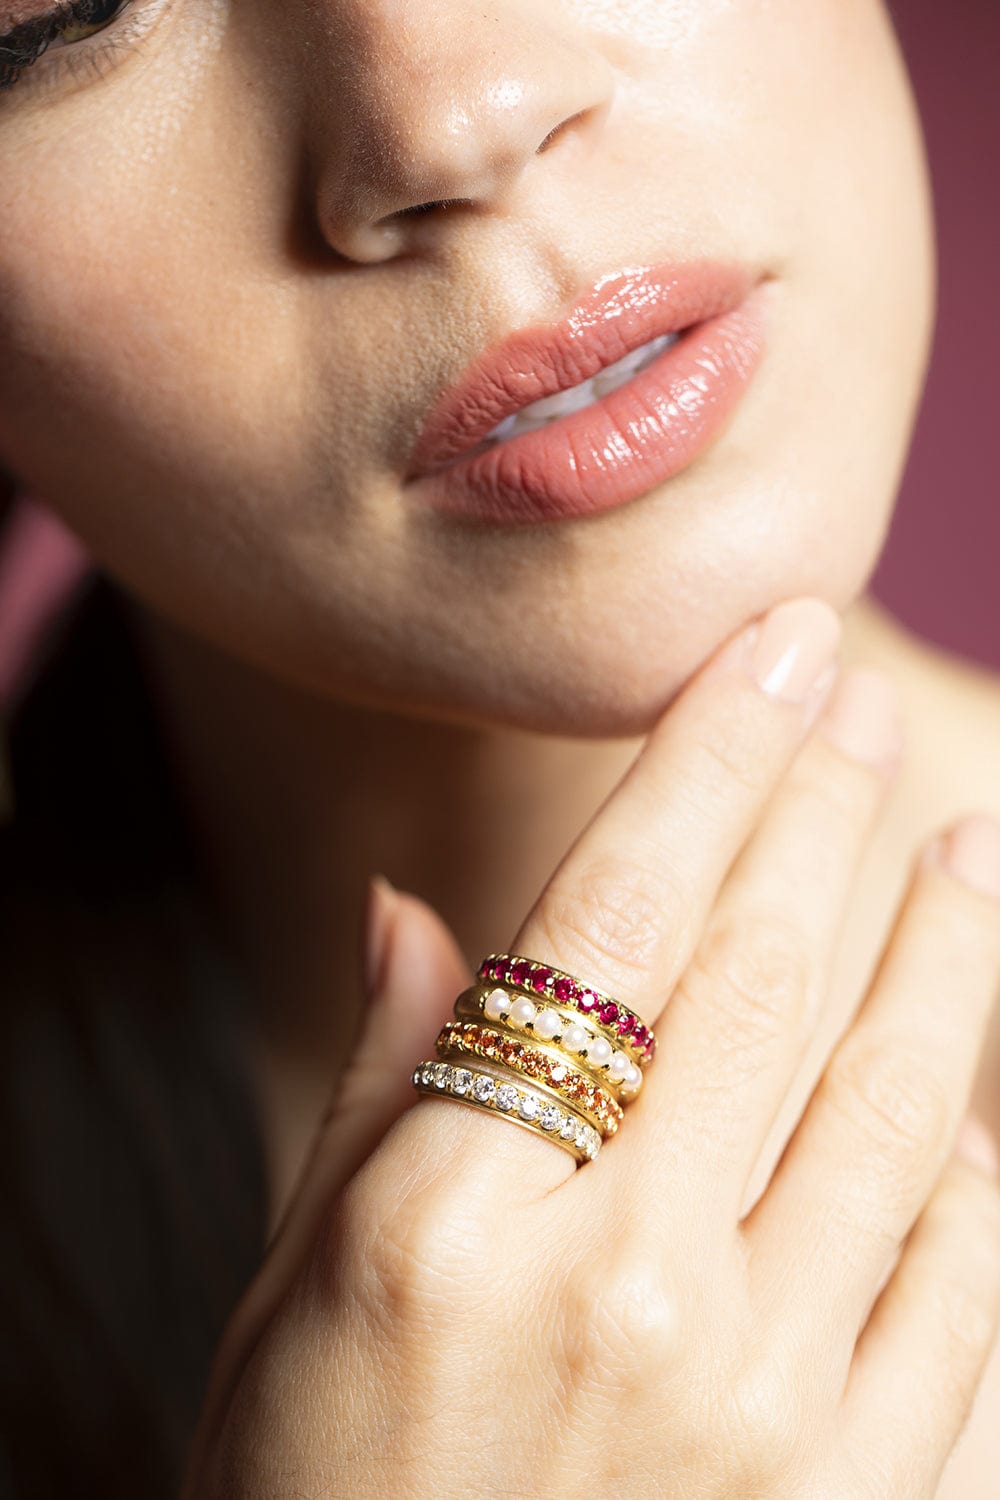 LEIGH MAXWELL-Ruby Edged Eternity Band-YELLOW GOLD